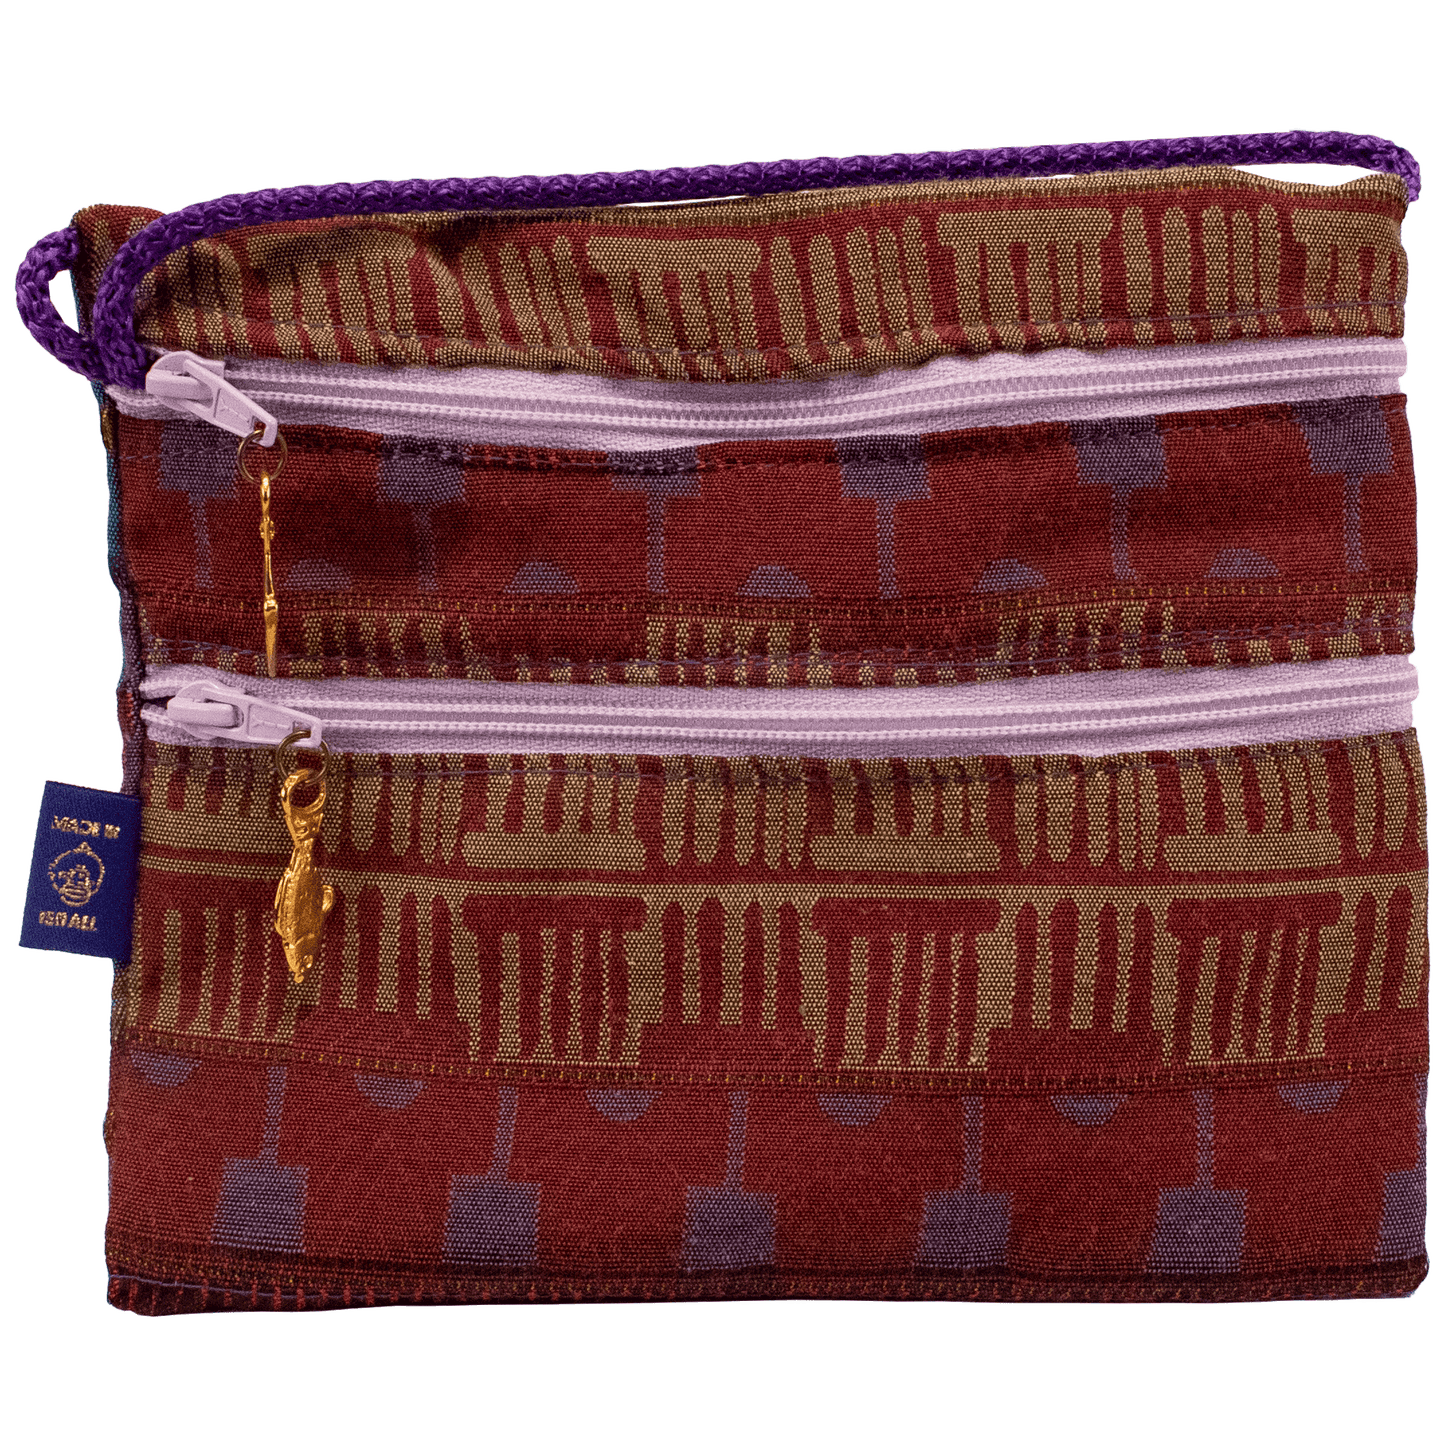 Double zipper horizontal crossbody bag with lavender zippers red and tan tones and roman-like pattern 